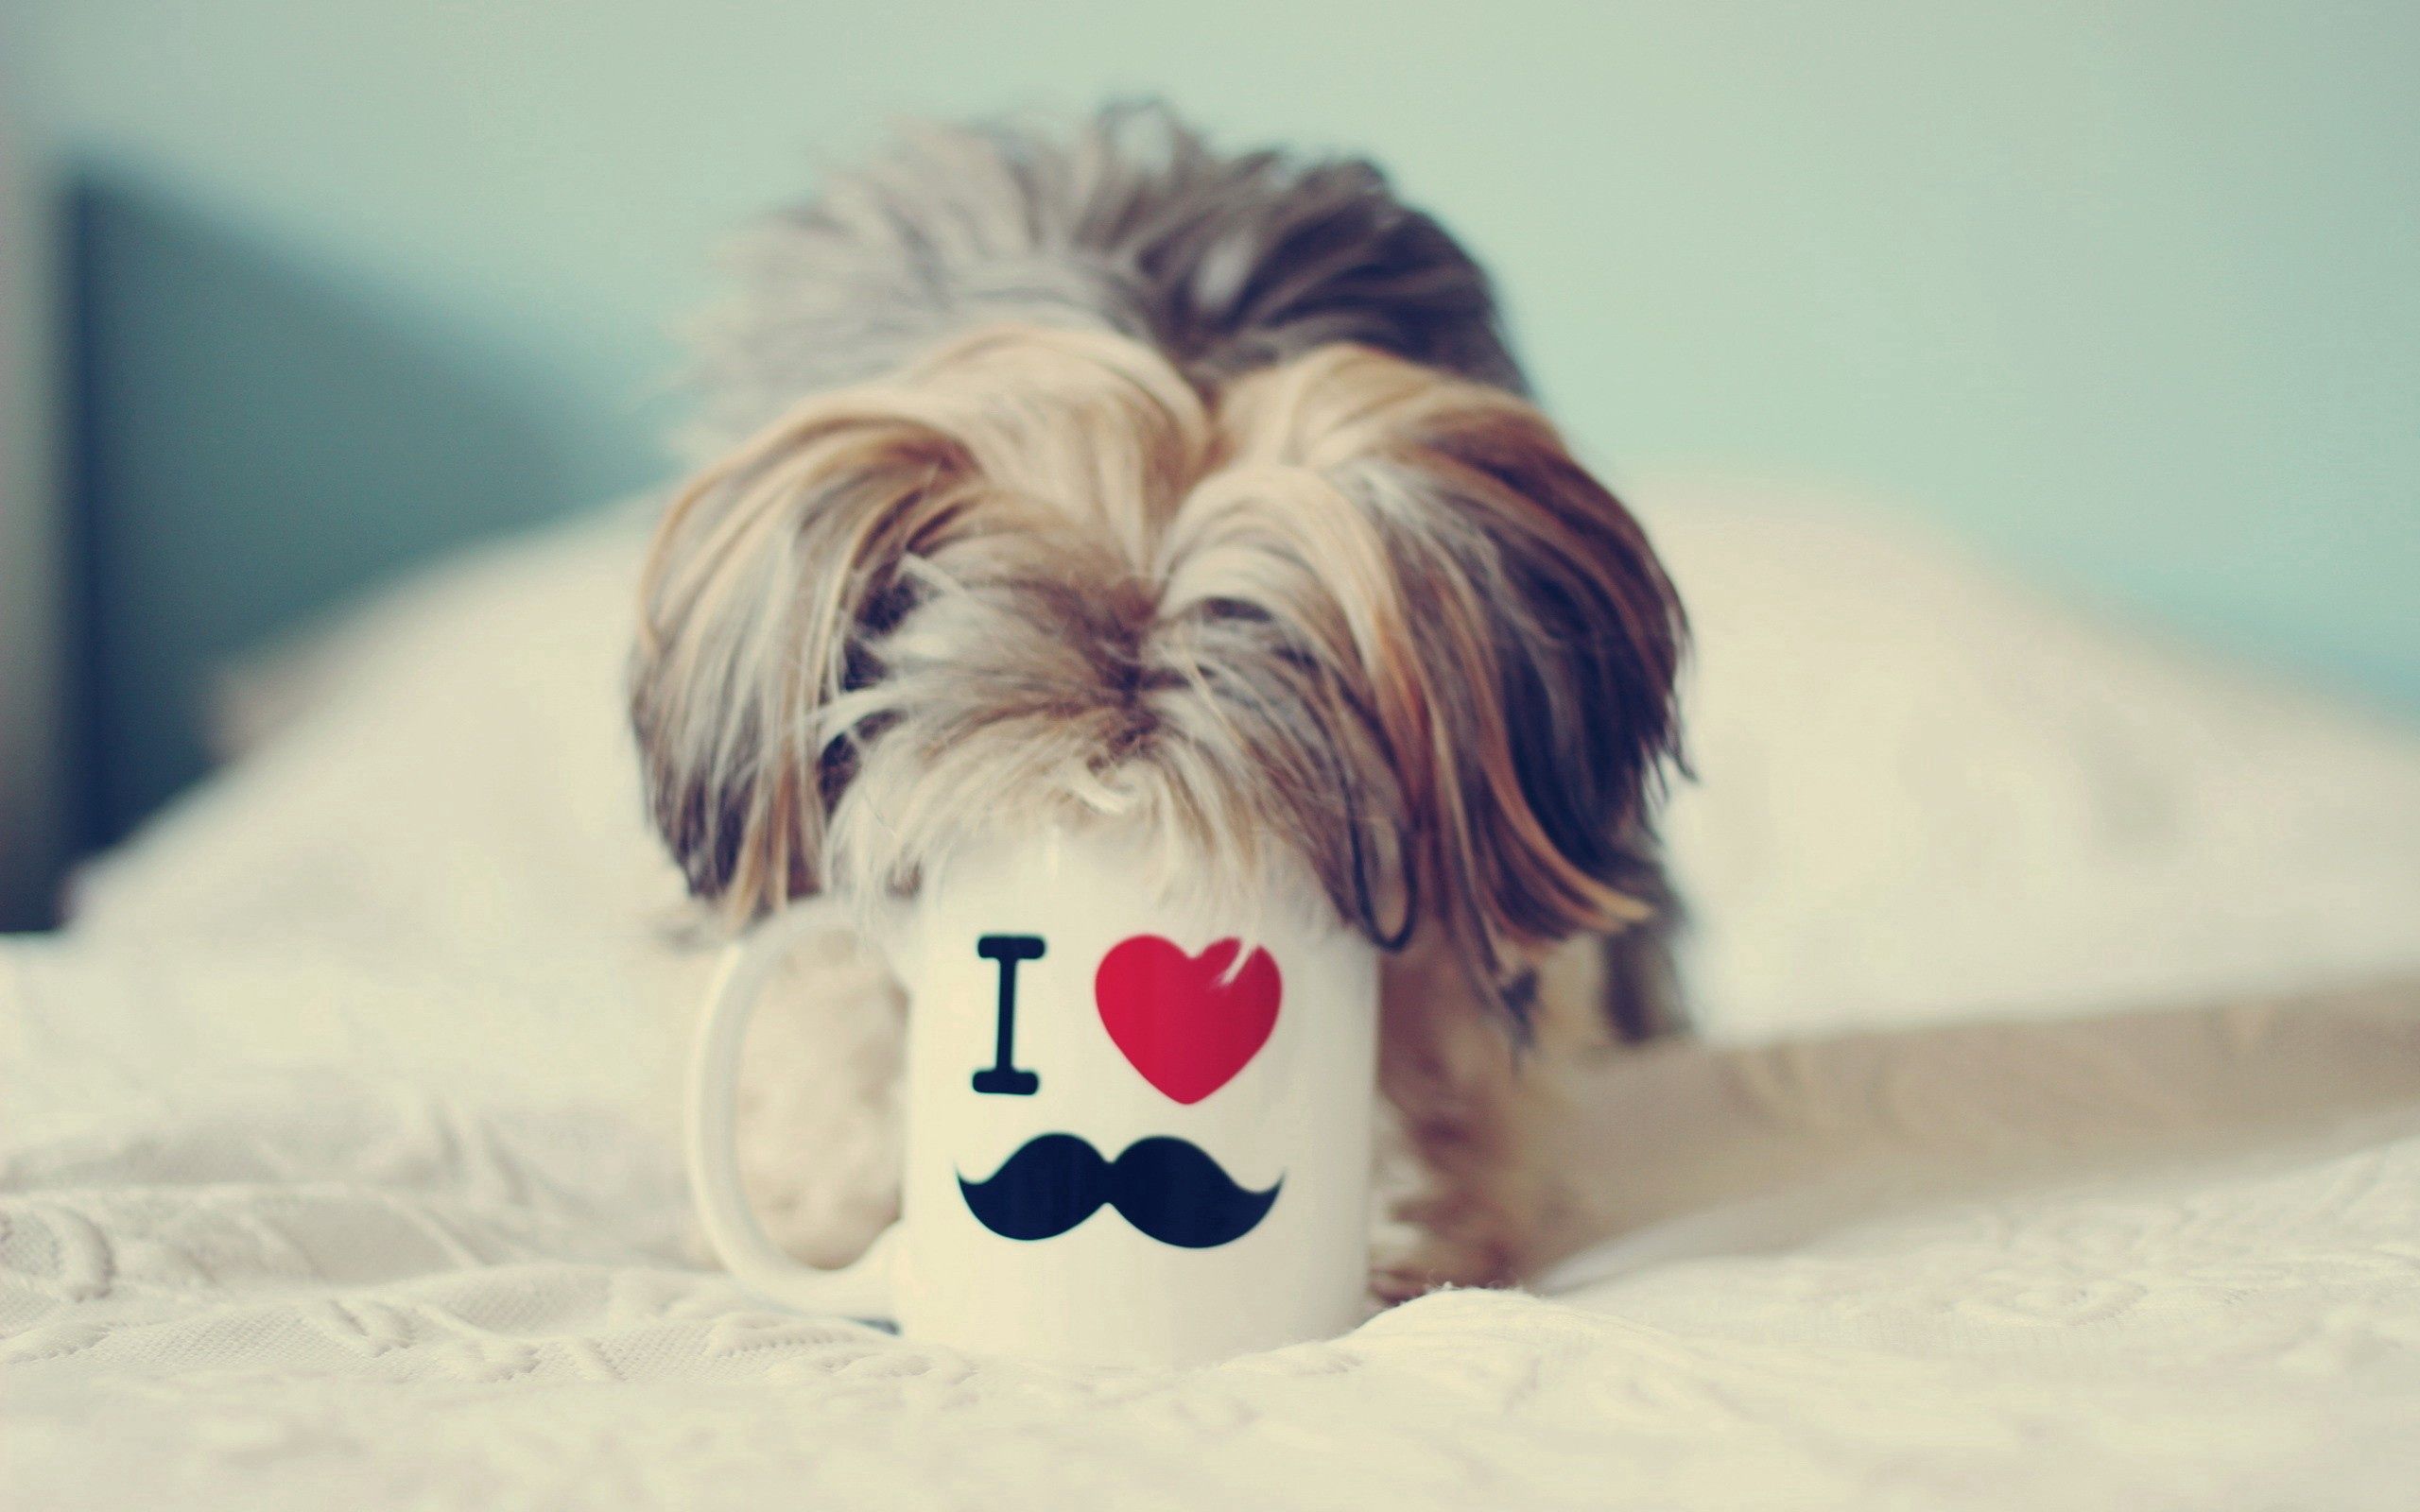 animals, dog, muzzle, cup, yorkshire terrier, curiosity